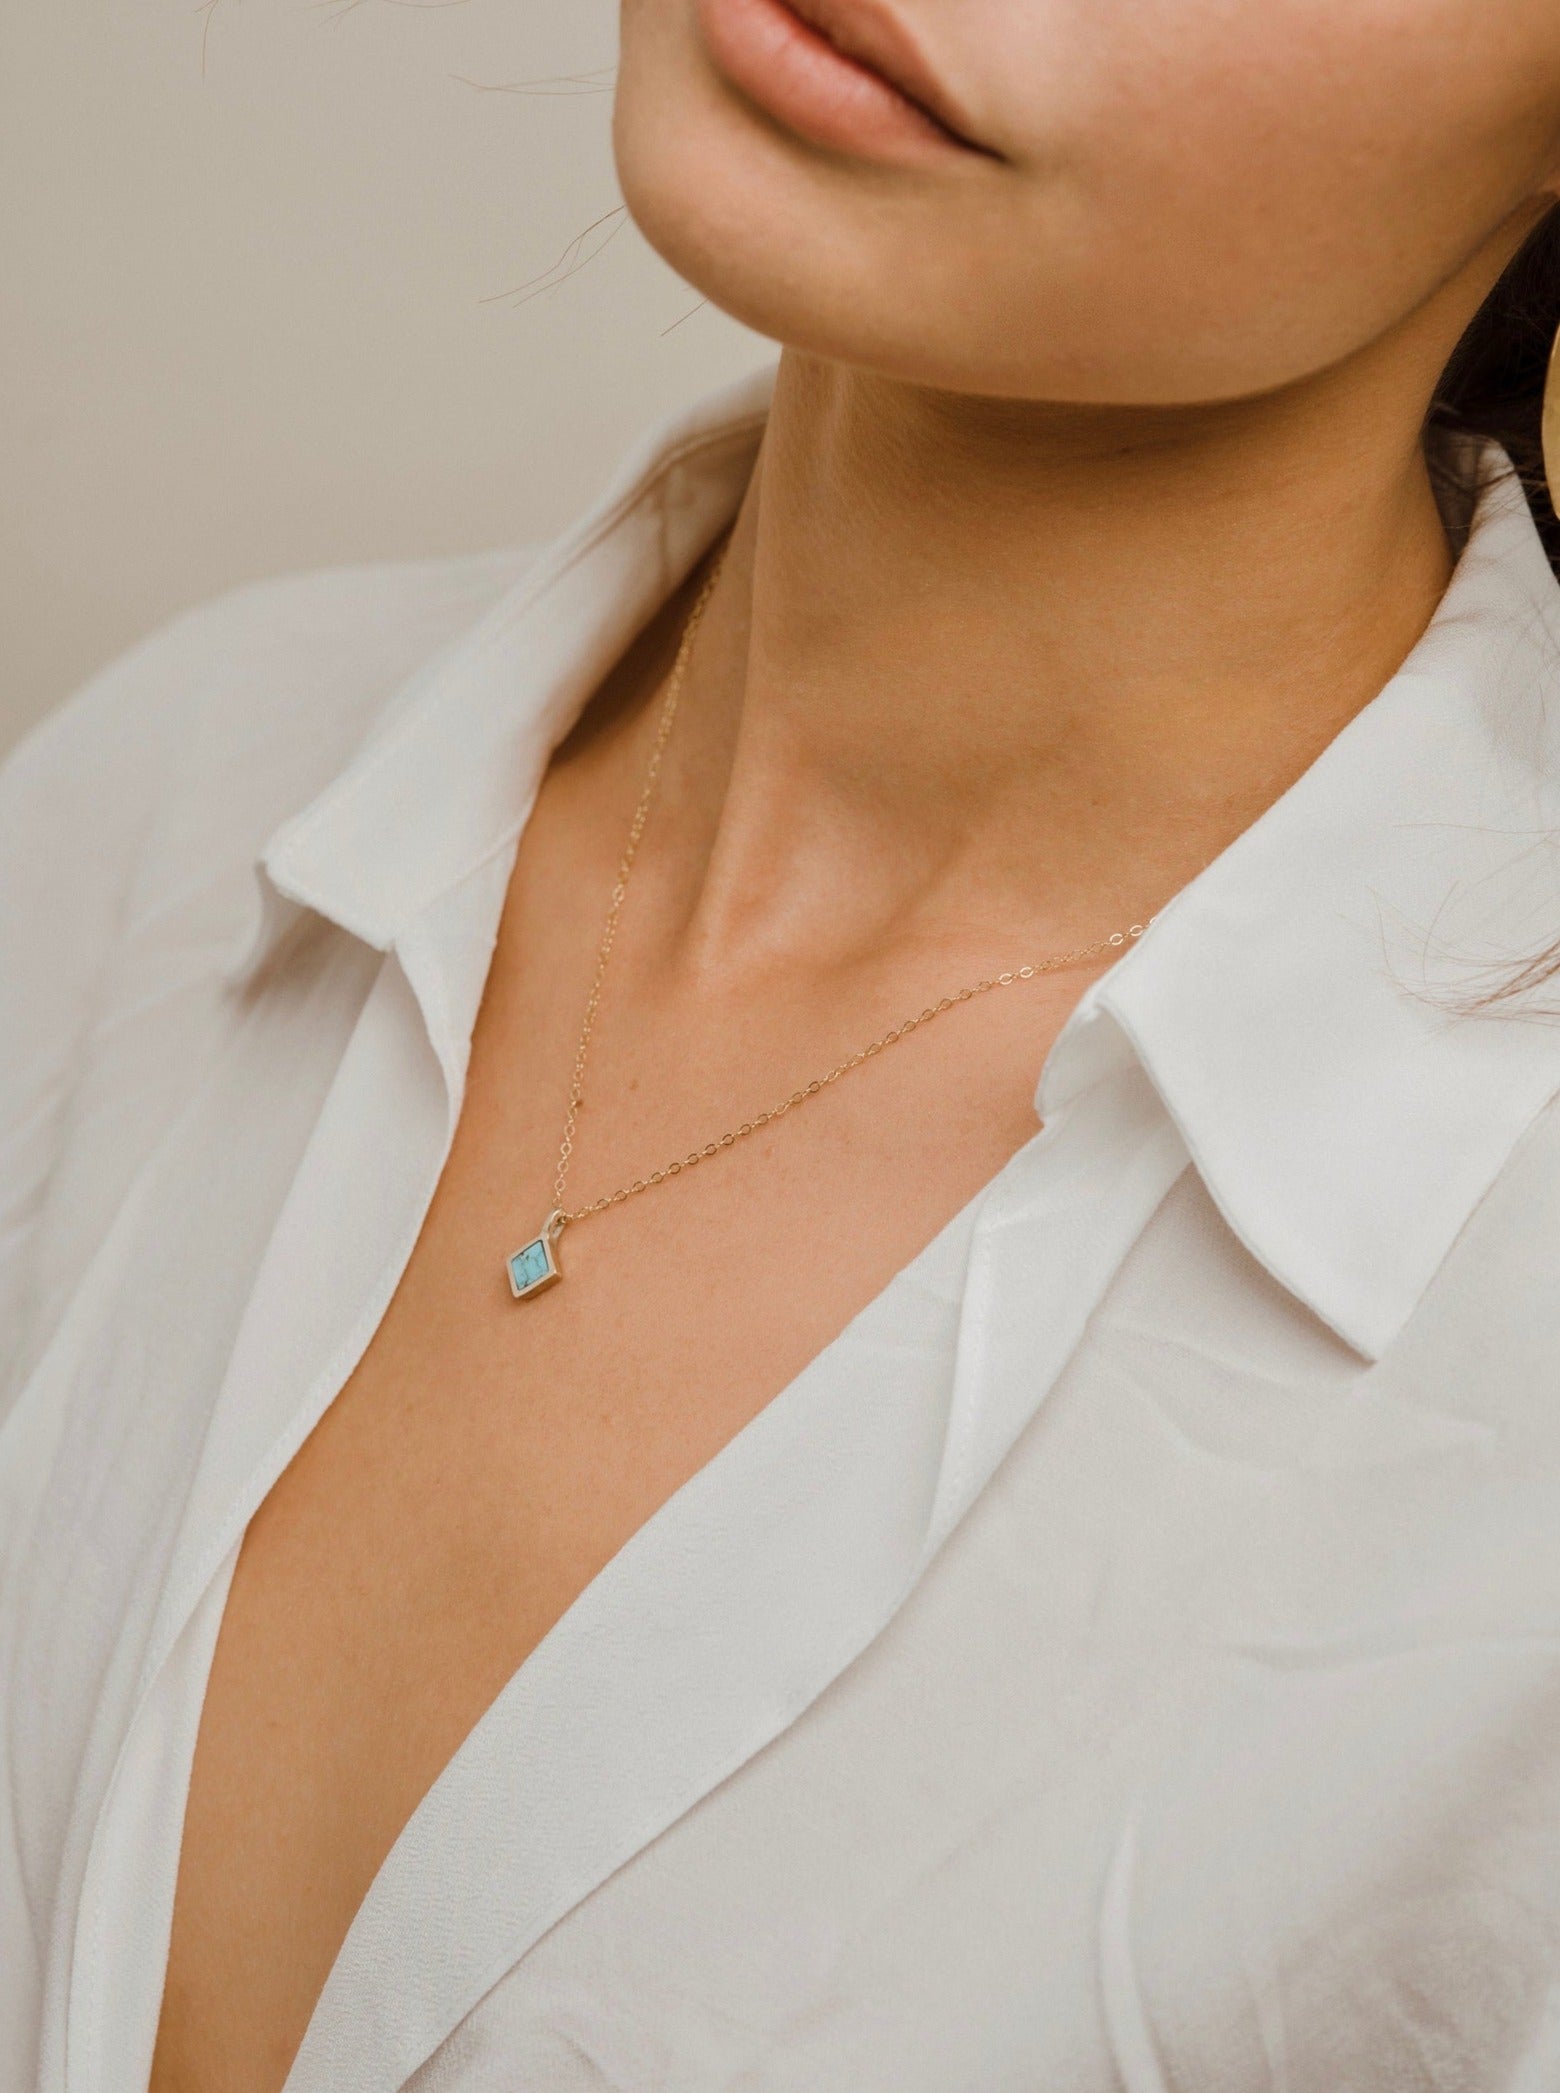 In this design, the delicate diamond shaped custom cut stone the real star. A tiny wearable work of natural stone art, a cut and polished slice of rock and mineral formed in the earth ~ a symbol of growth, development and change. Handmade in the Santa Cruz Mountains.